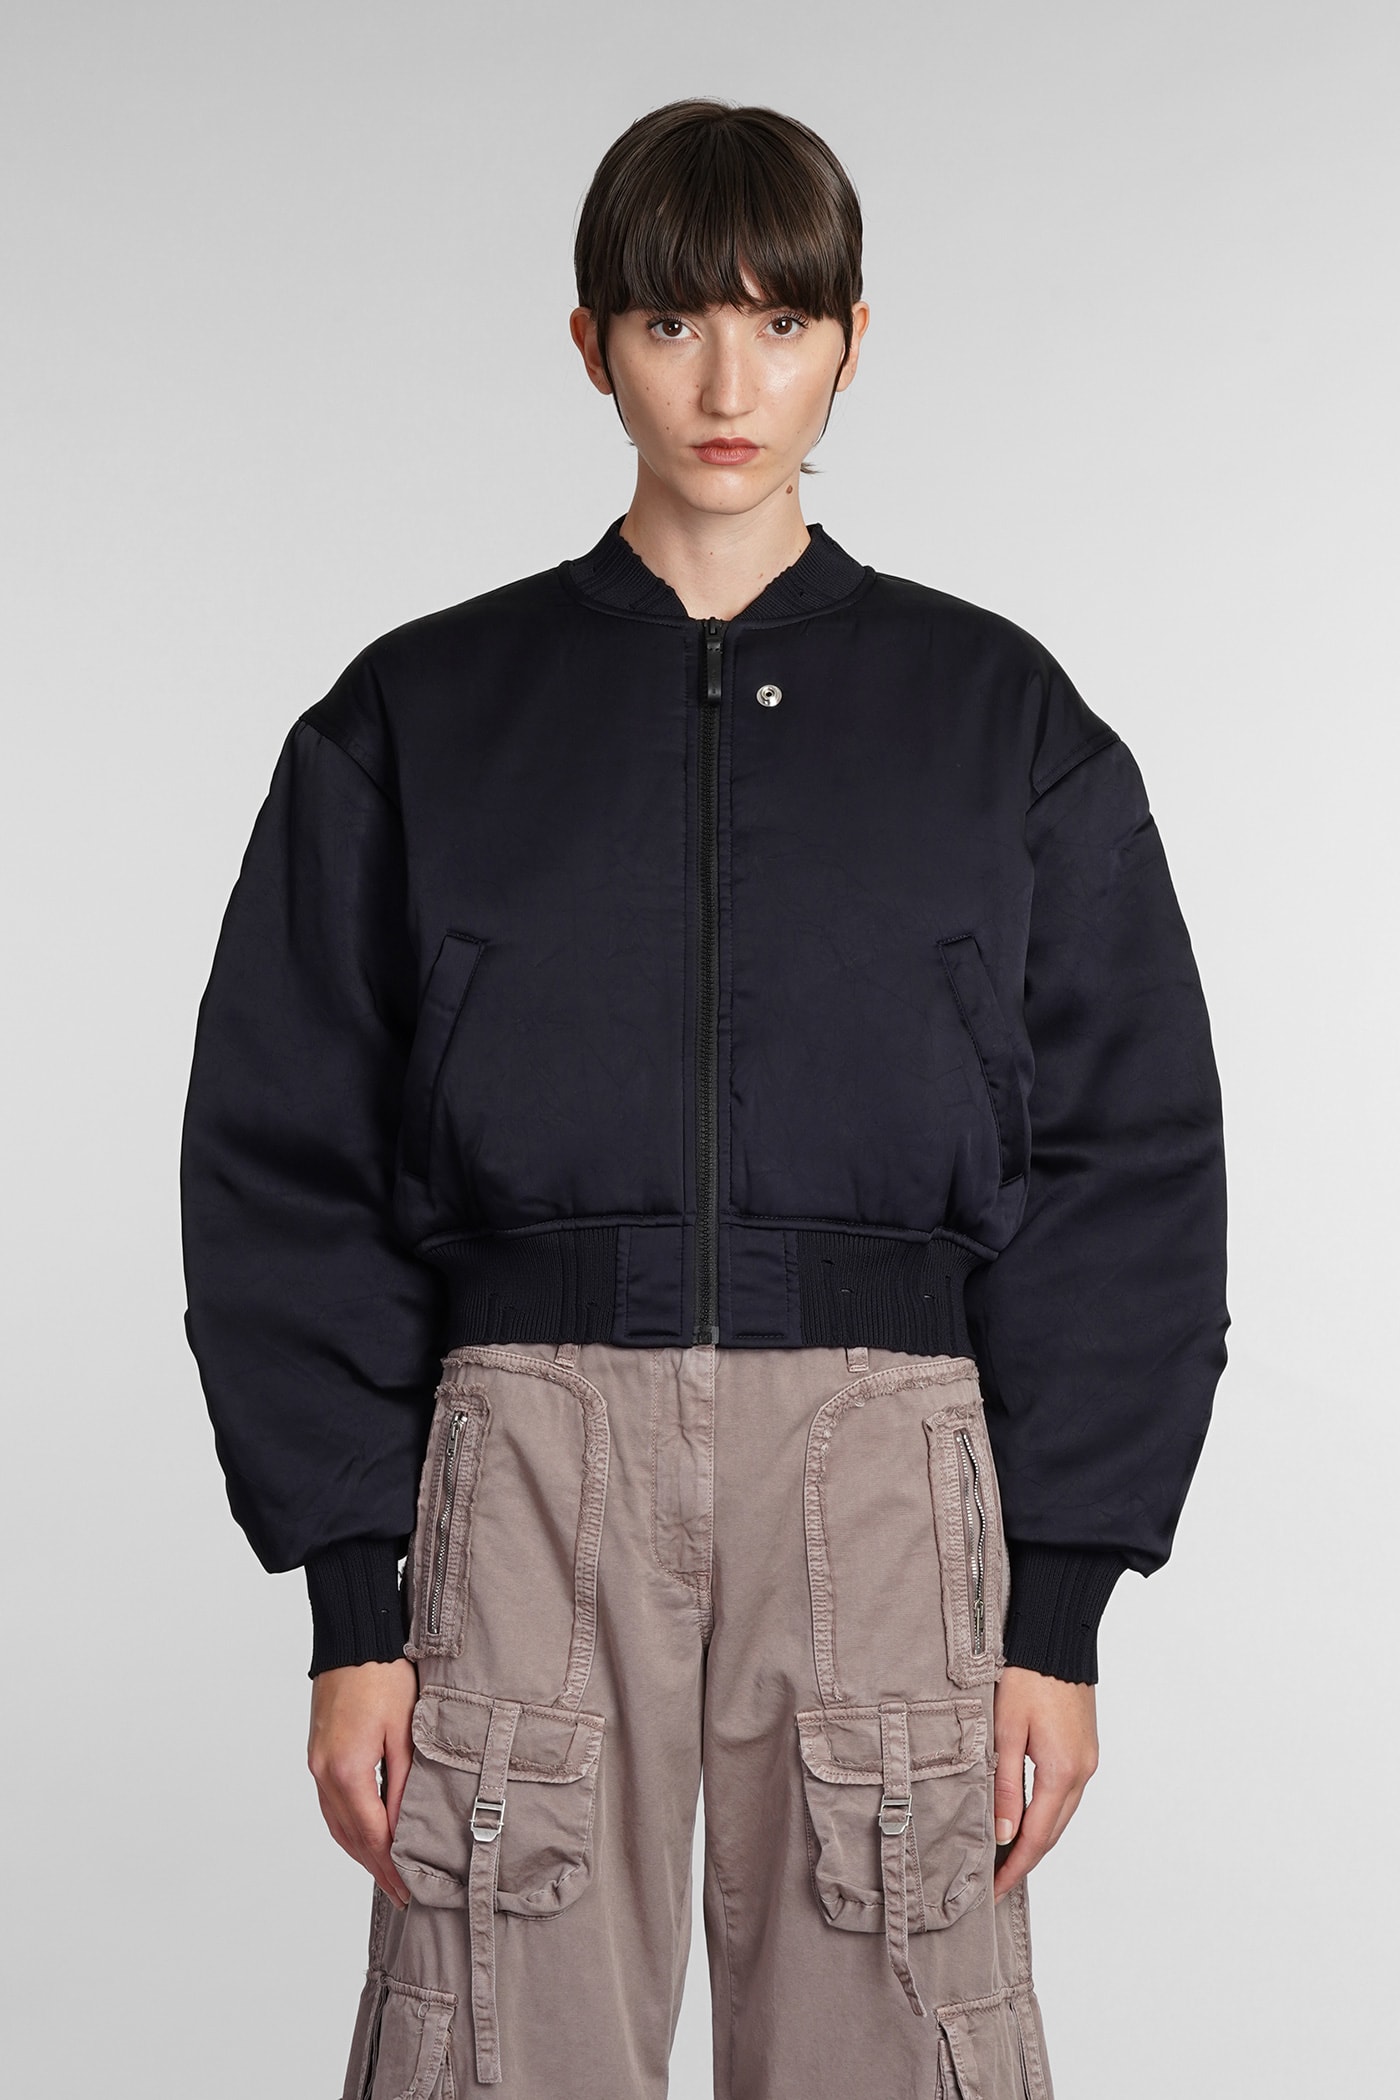 ACNE STUDIOS CASUAL JACKET IN BLACK POLYESTER